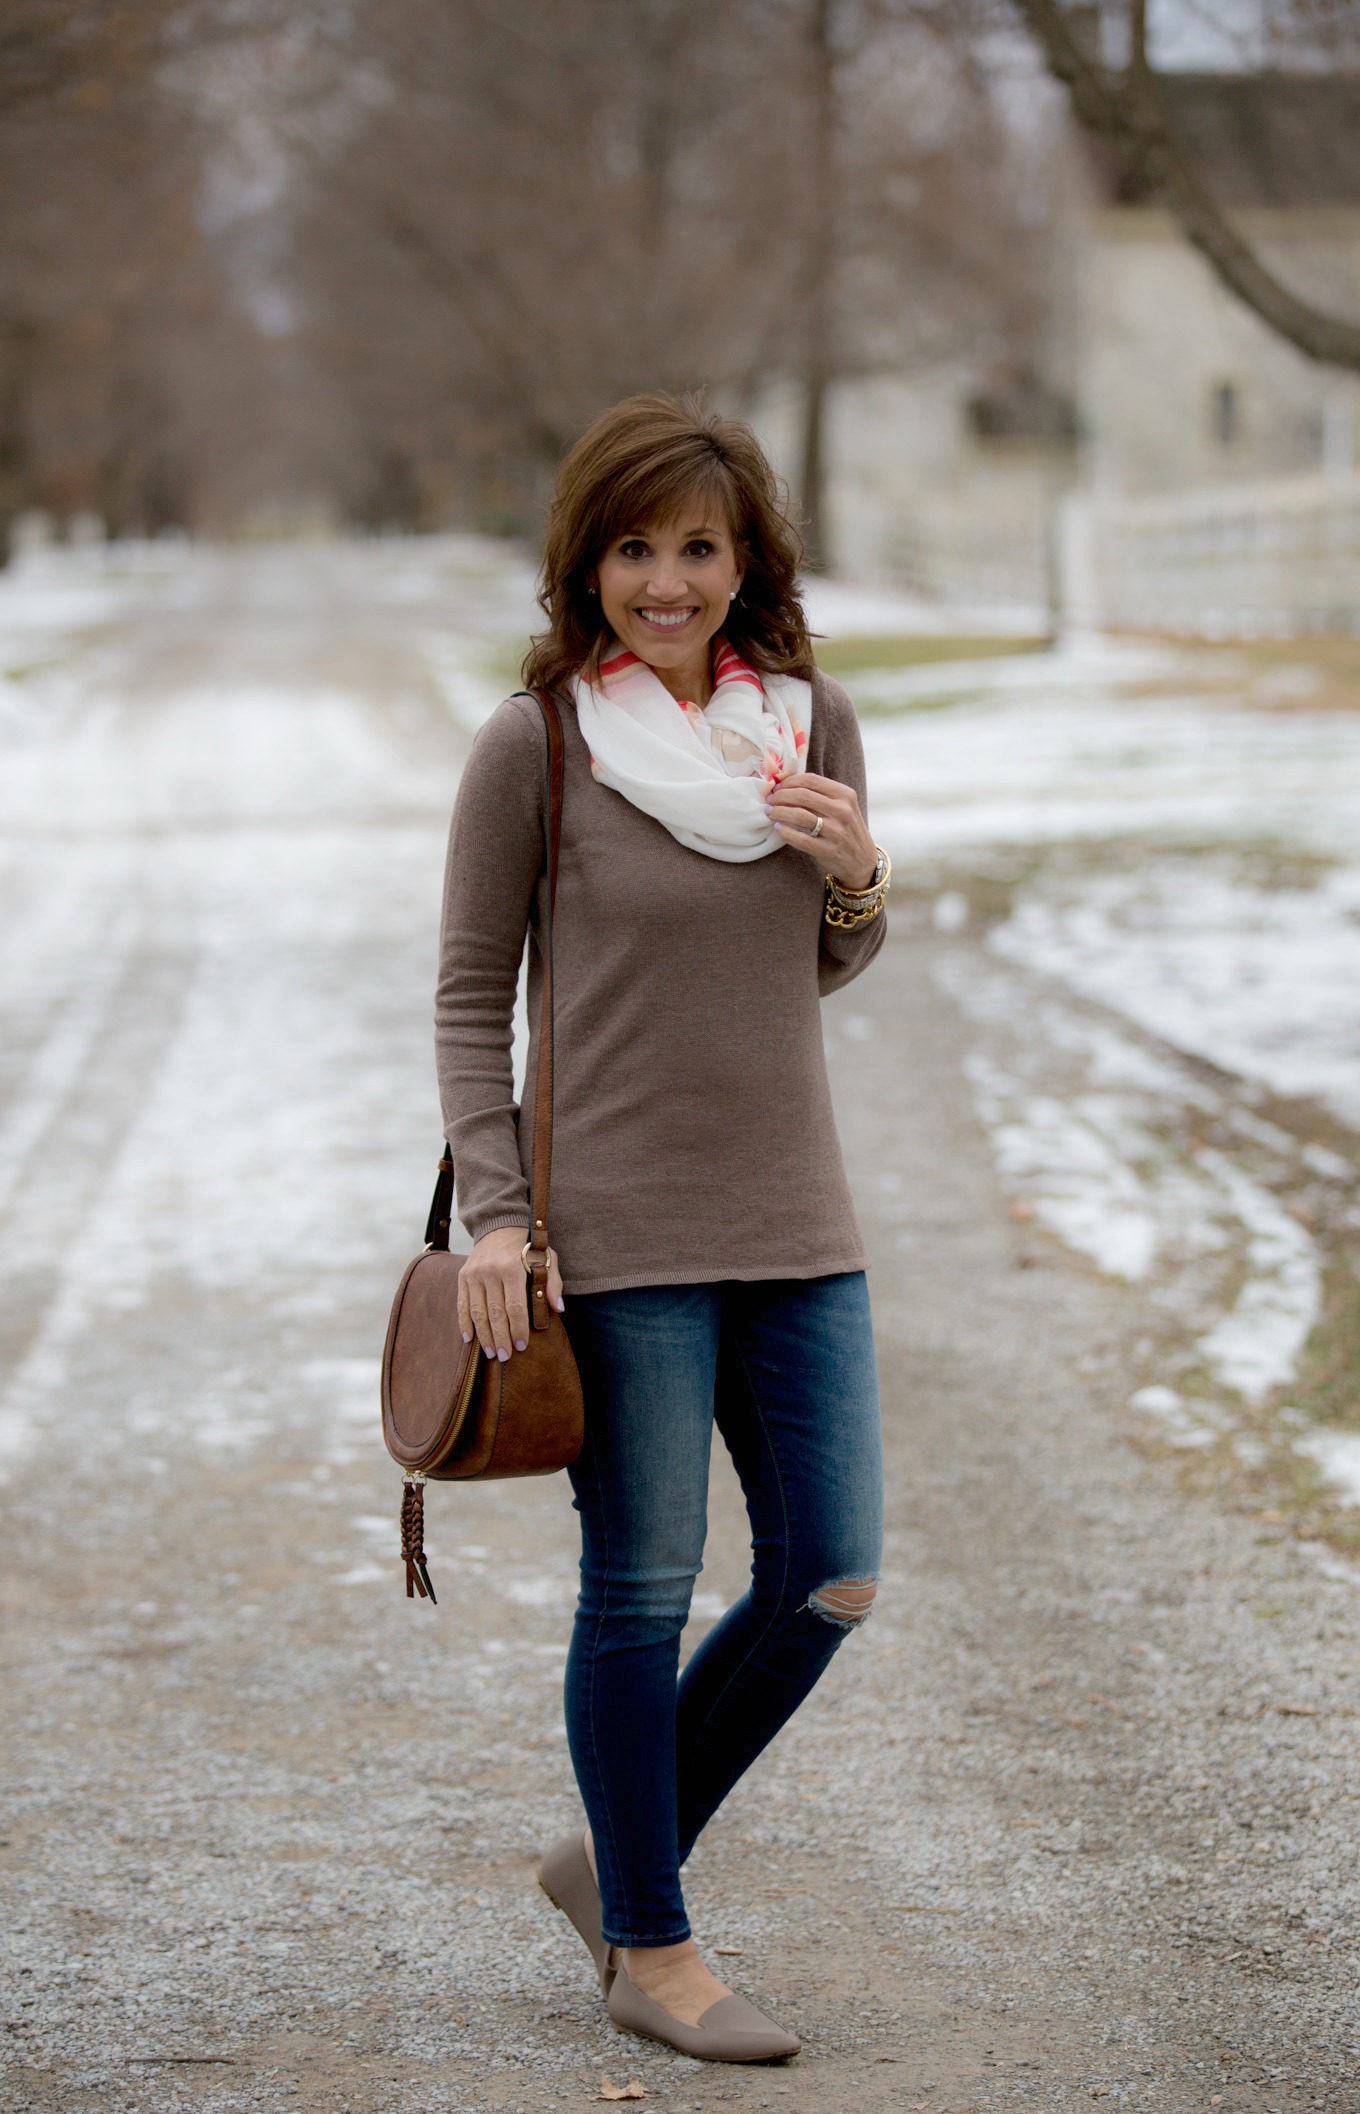 Over 40 fashion blogger, Cyndi Spivey, styling a casual winter outfit.